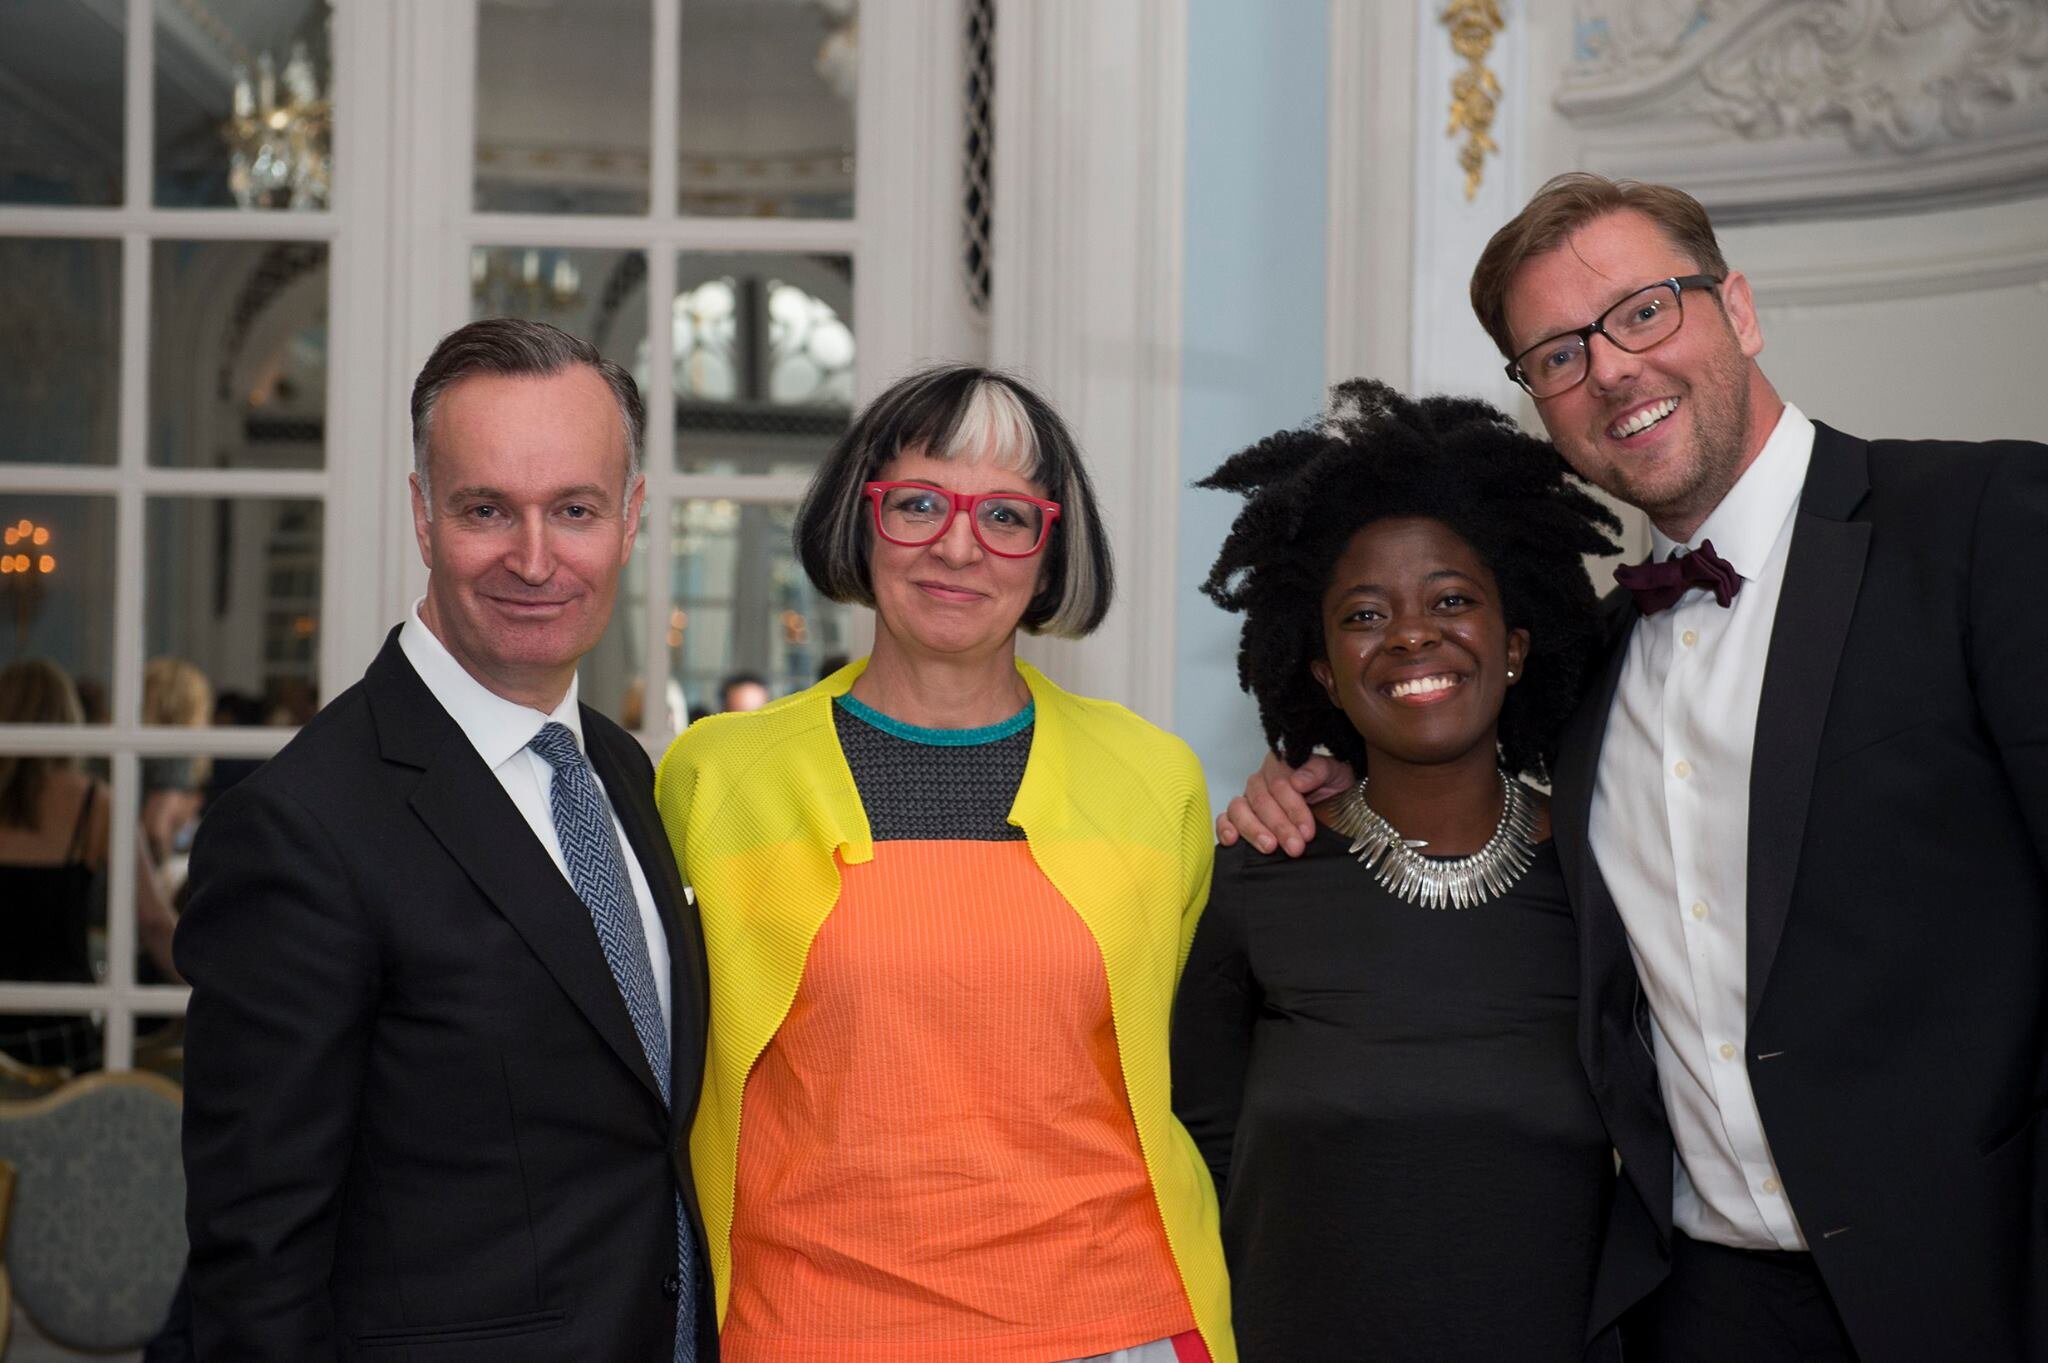 This photo was taken by @honeybunnphotog at @thesavoylondon in 2016 when we were celebrating our 8th birthday! Philippa Perry (@kevinkittycat ), Yaa Gyasi and @andrewohaganauthor all wowed us from the stage!
.
.
.
#philippaperry #savoyhotel #thesavoy